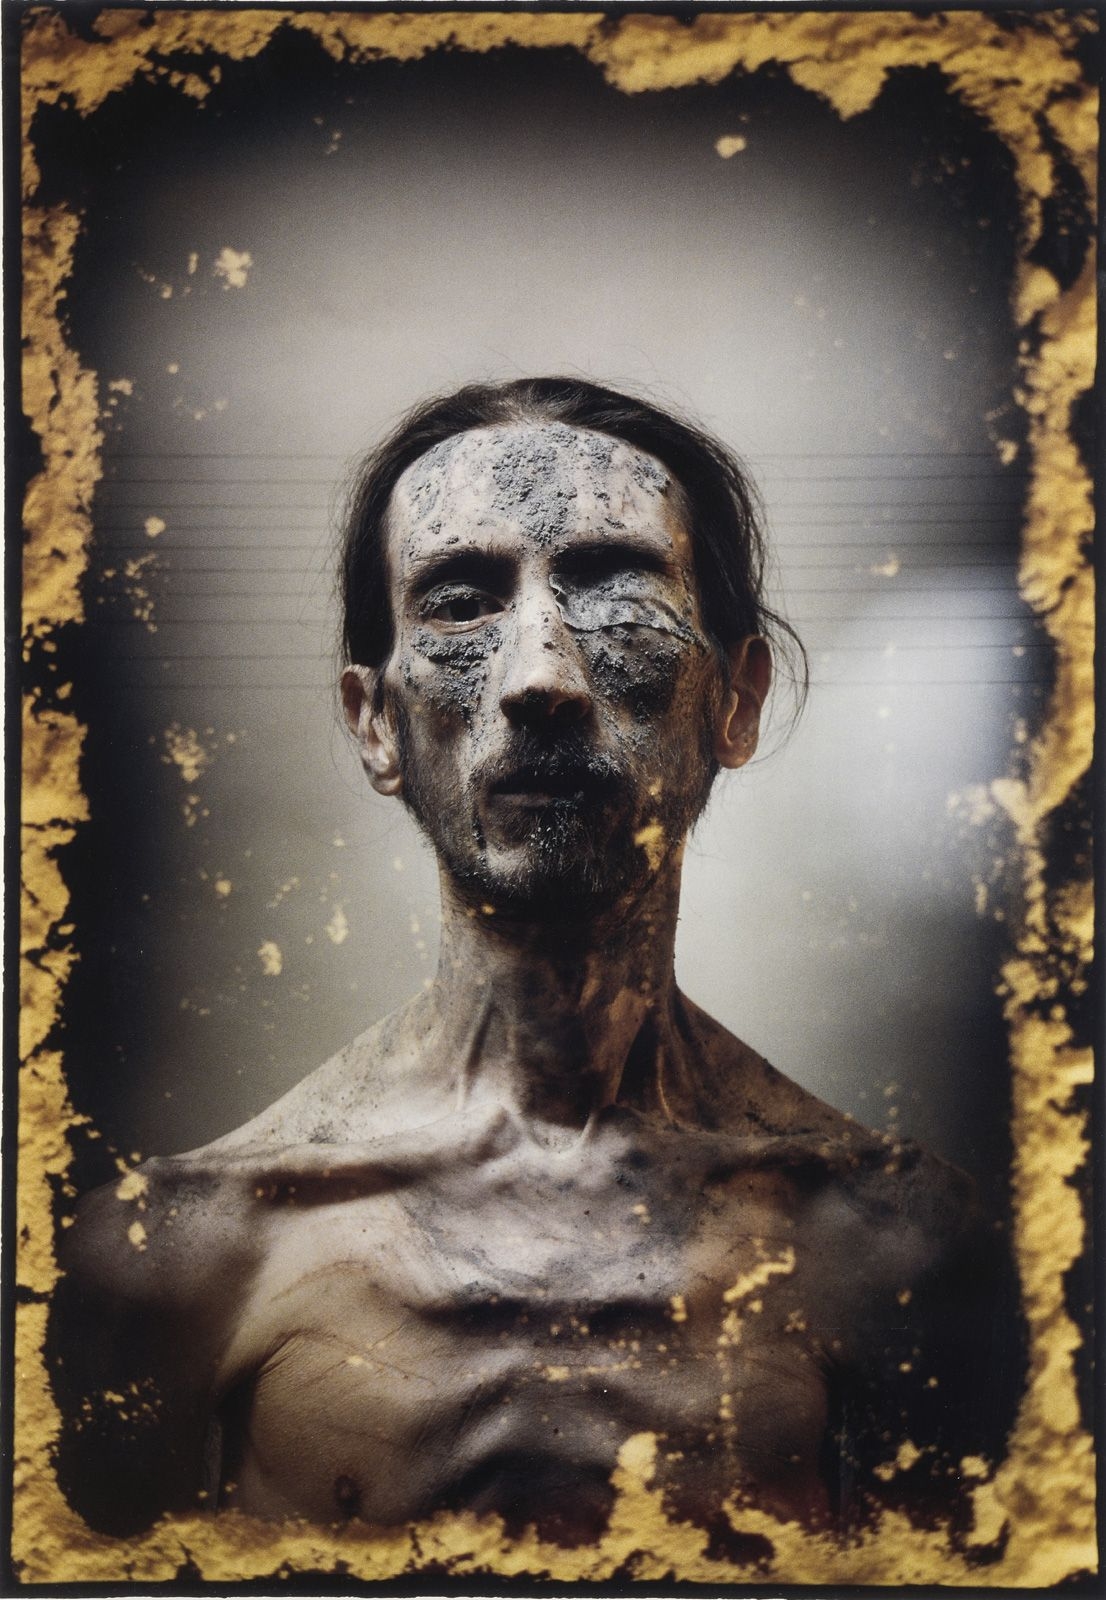 Artwork by David Nebreda, The mirror, ash, excrement, alpha and omega on the forehead, Self-Portrait series, Made of Photography. Colour print